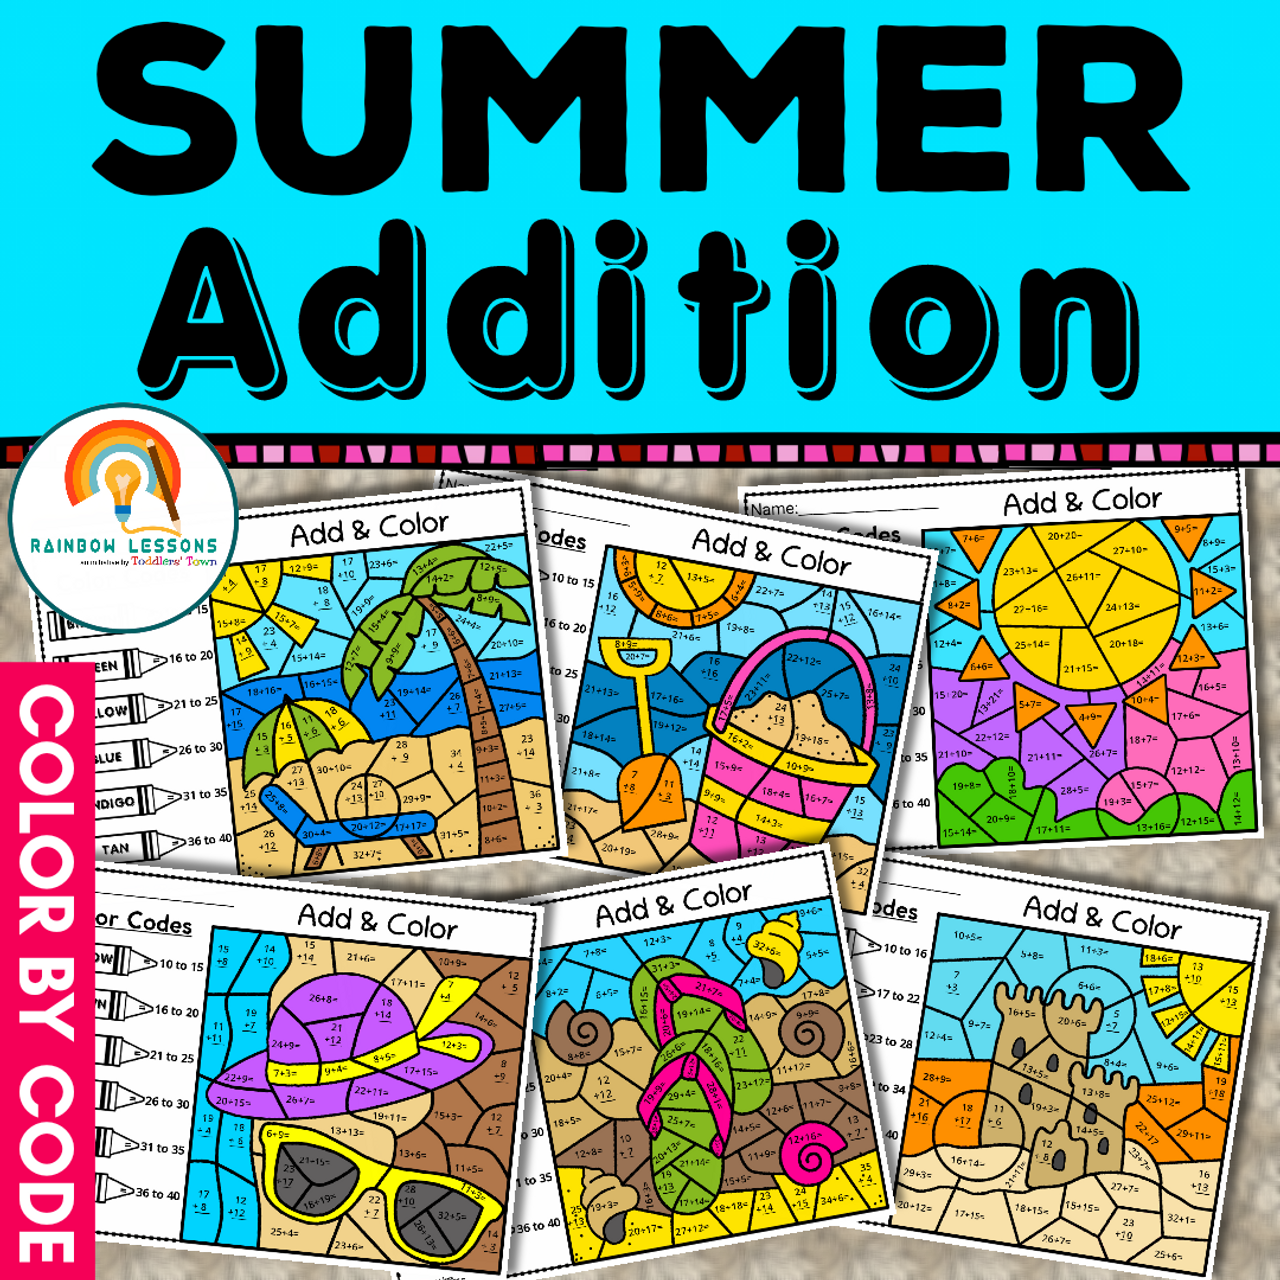 Summer coloring sheets summer addition color by number summer coloring pages digit addition with and without regrouping